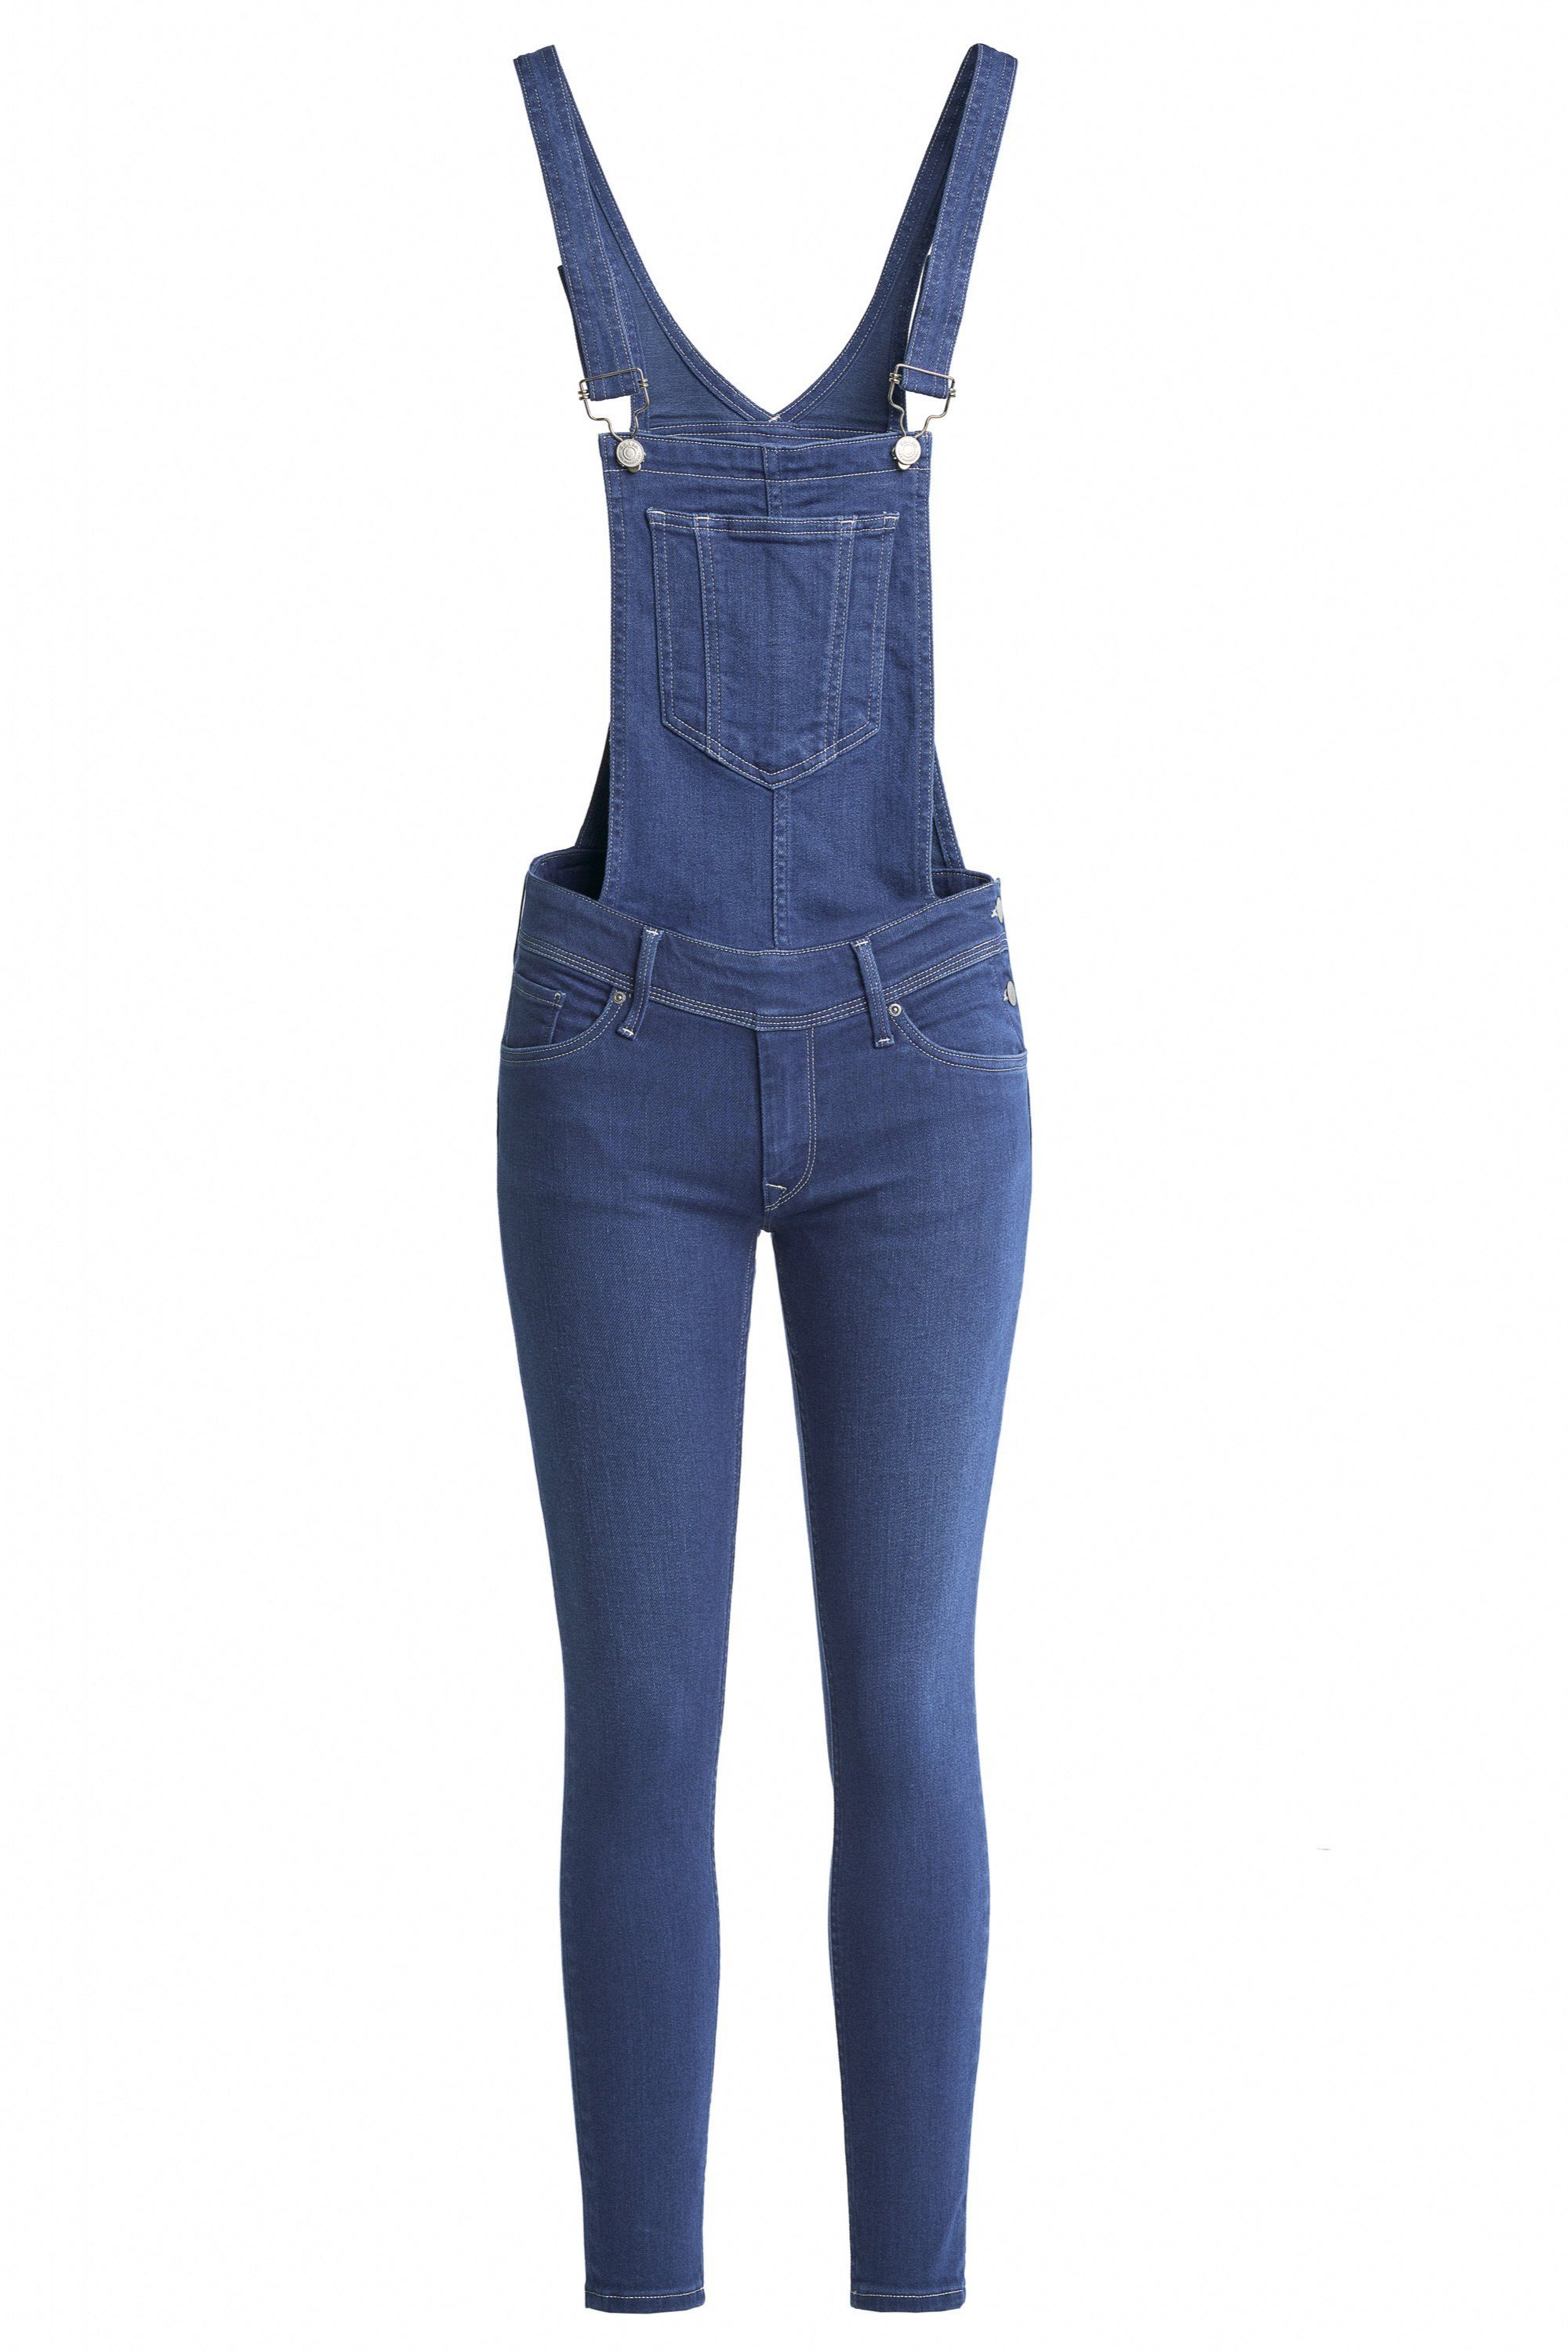 PUSH blue 125181.8503 Salsa WONDER Stretch-Jeans OVERALL JEANS UP SALSA bright